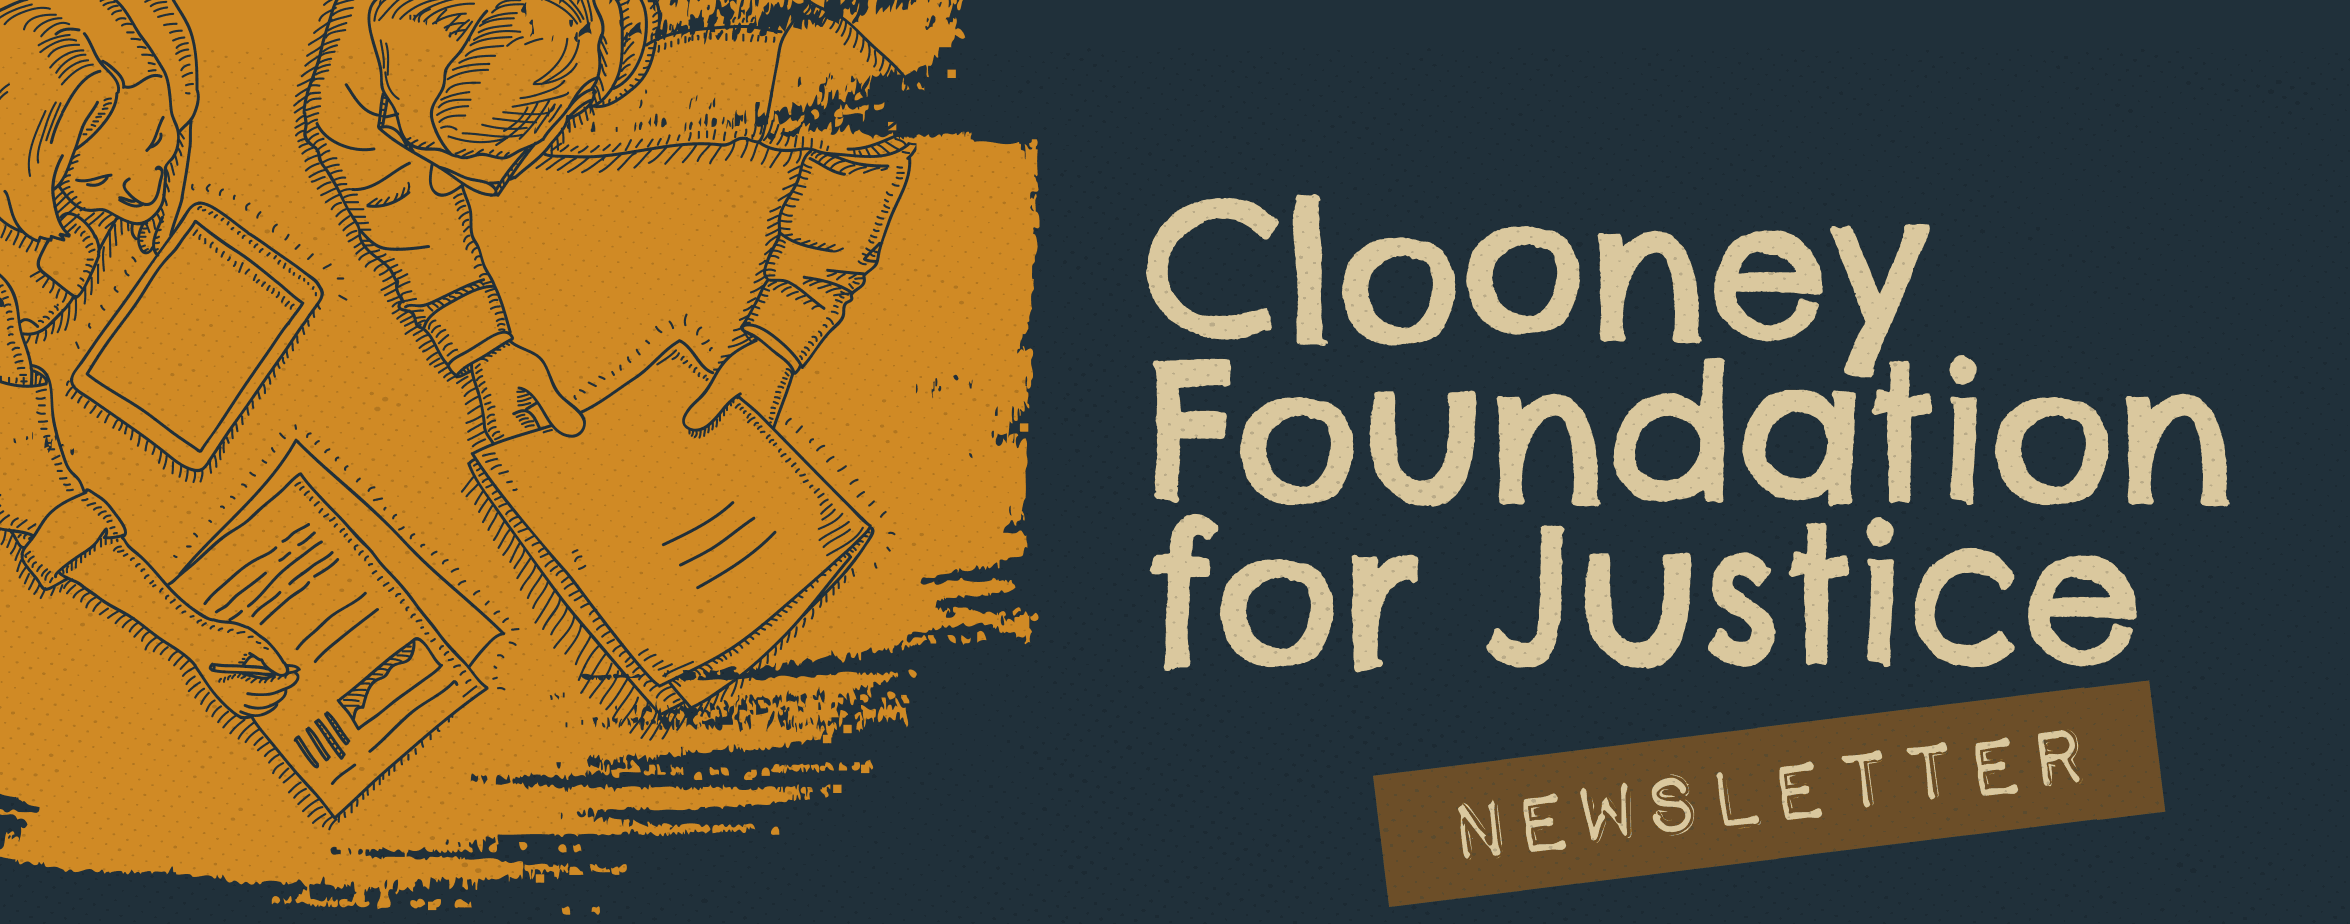 Clooney Foundation for Justice Newsletter